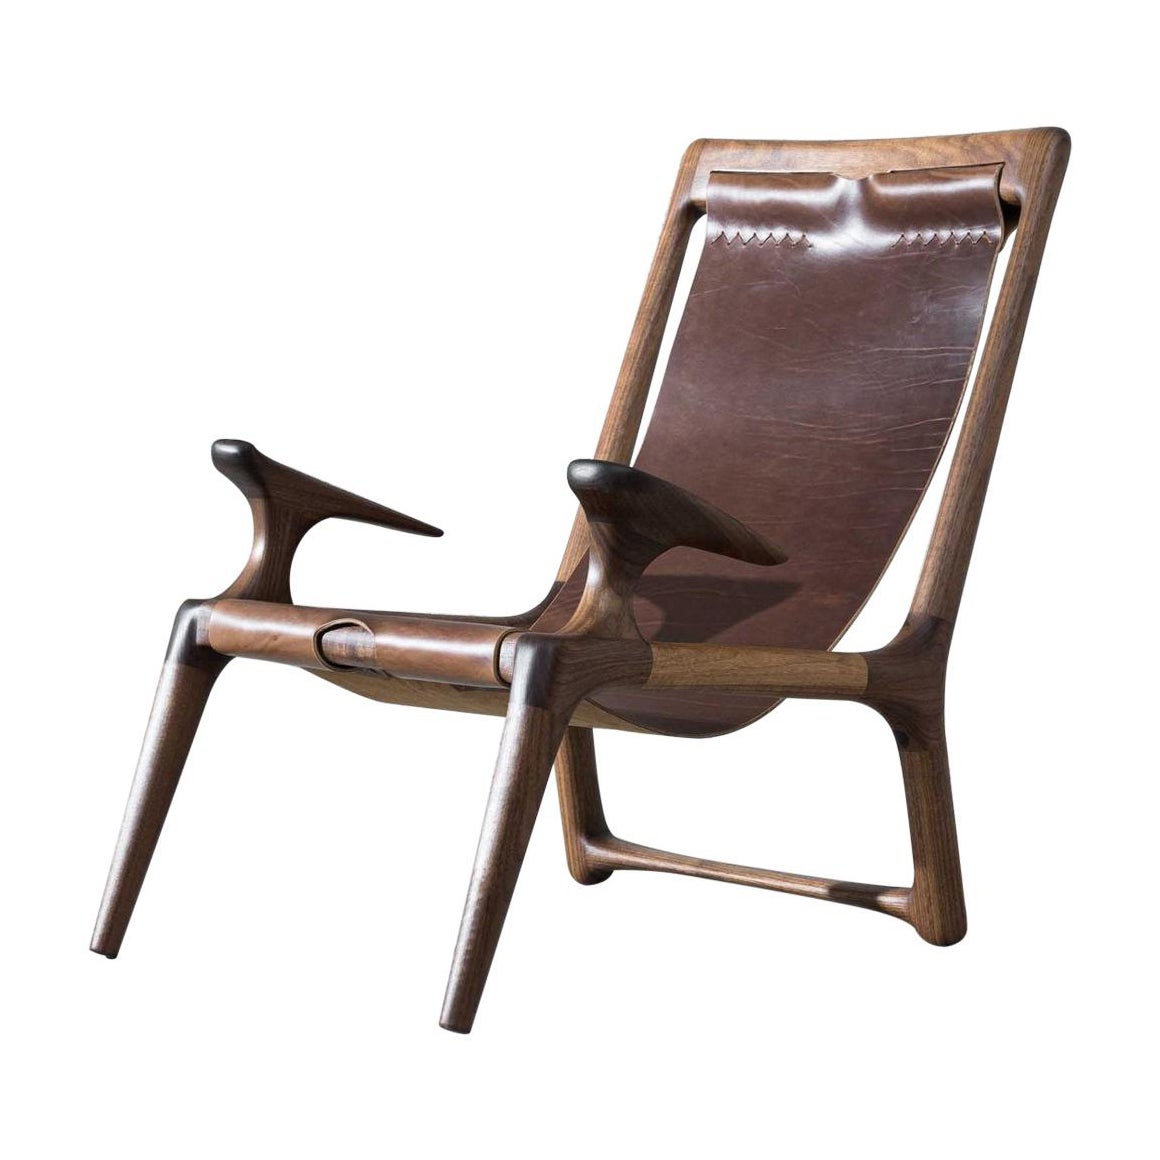 Walnut & Leather Sling Chair by Fernweh Woodworking